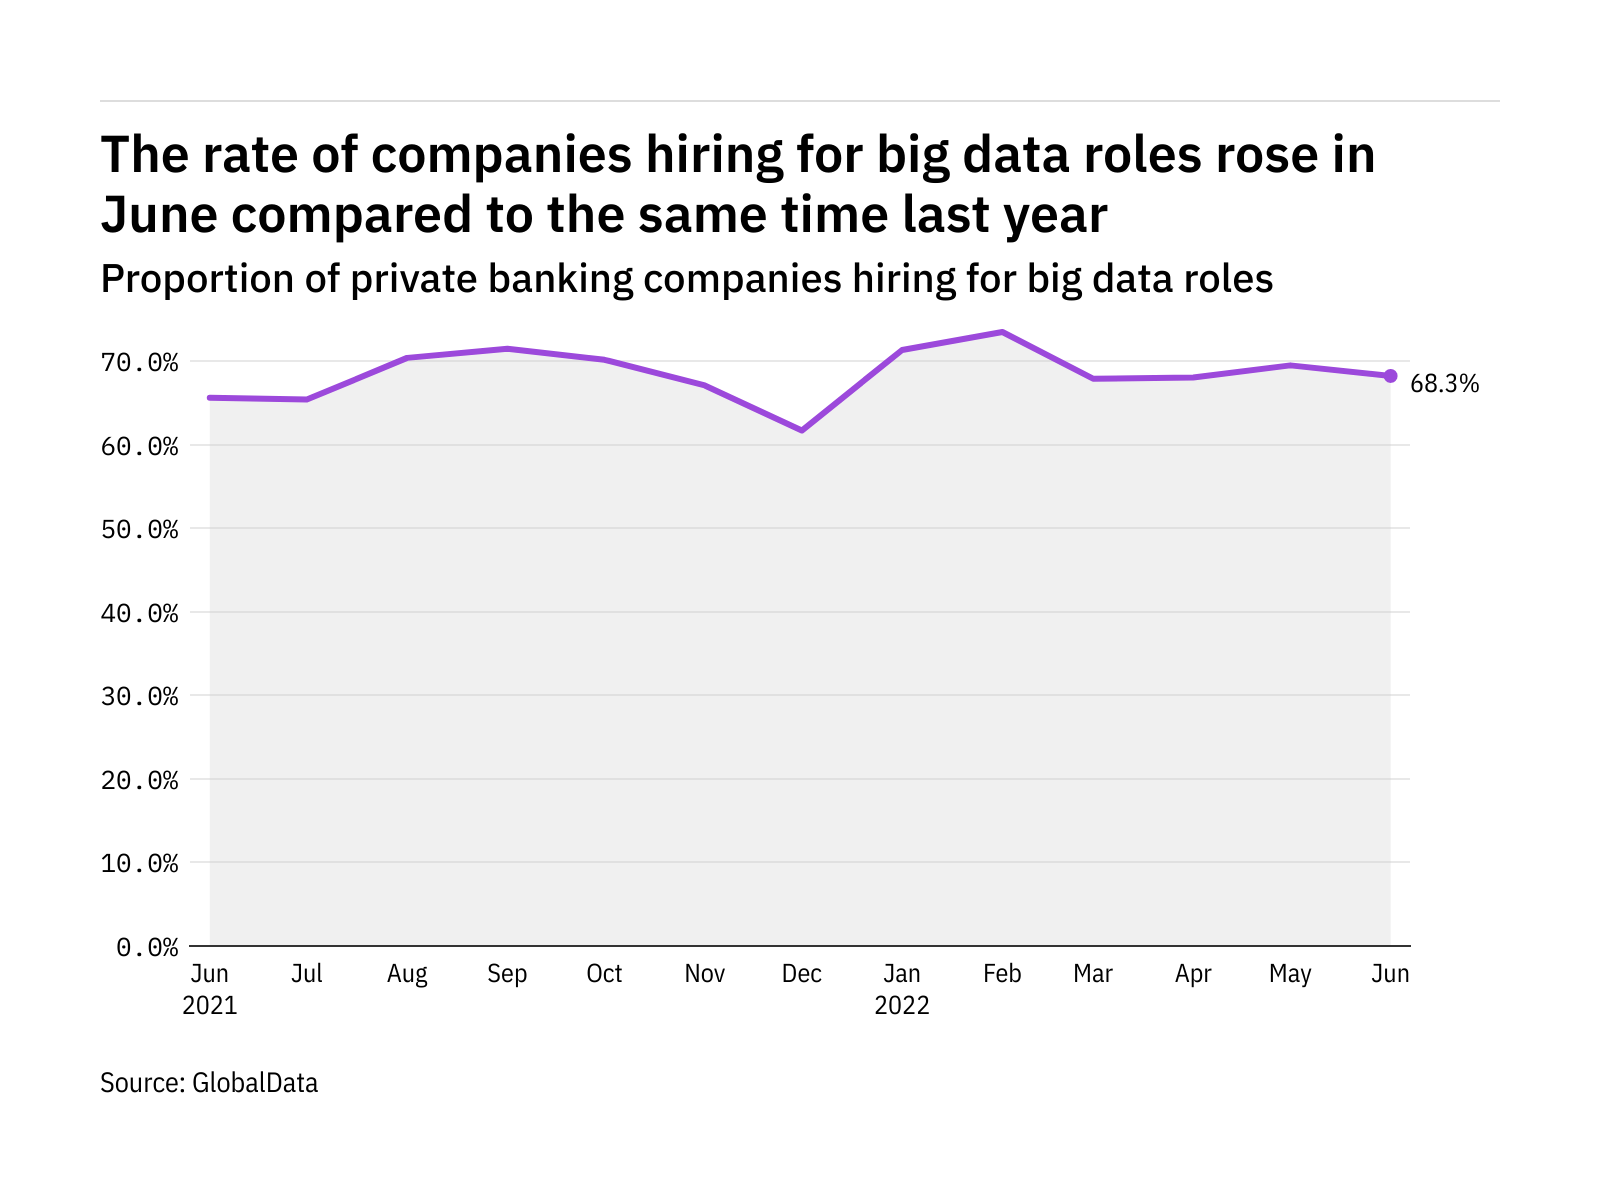 Big data hiring levels in the private banking industry rose in June 2022